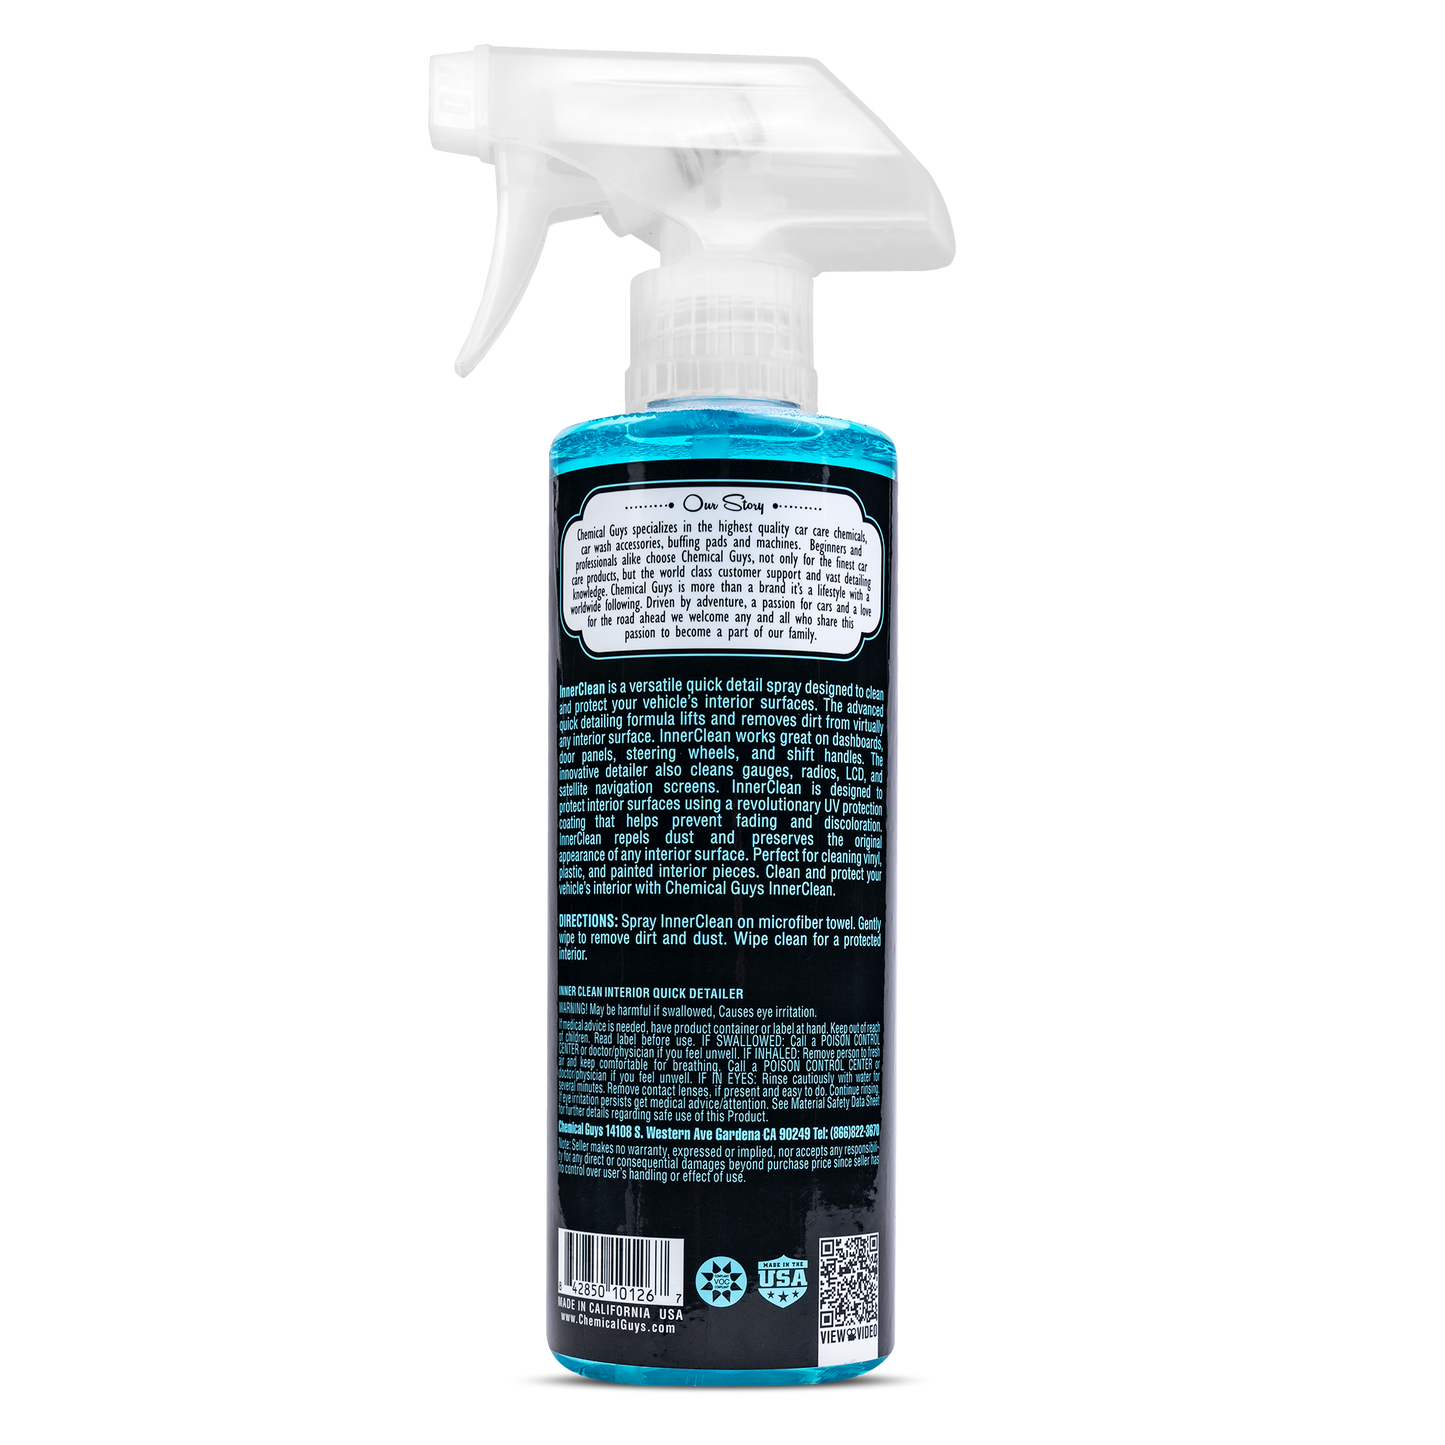 Inner Clean Interior Quick Detailer & Protectant Baby Powder Scent